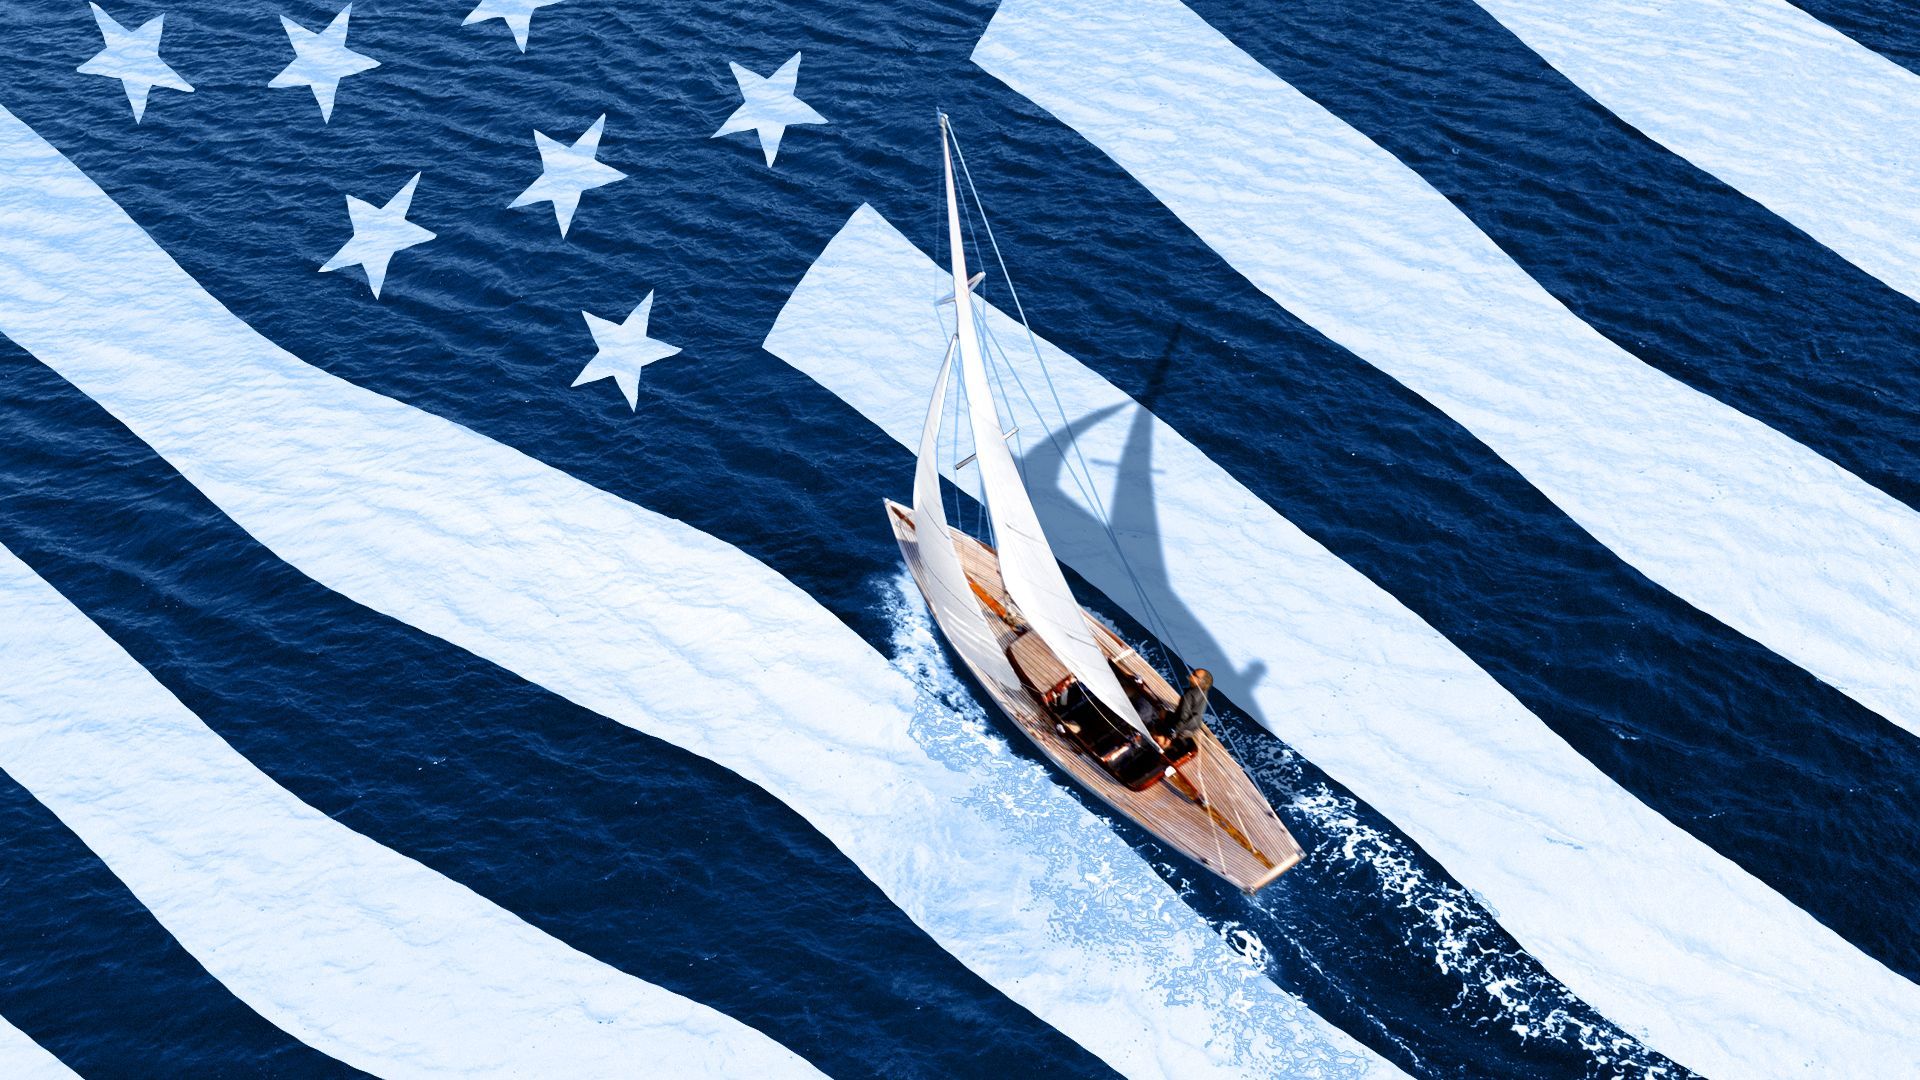 Illustration of a sailboat on a body of water with a US flag overlay